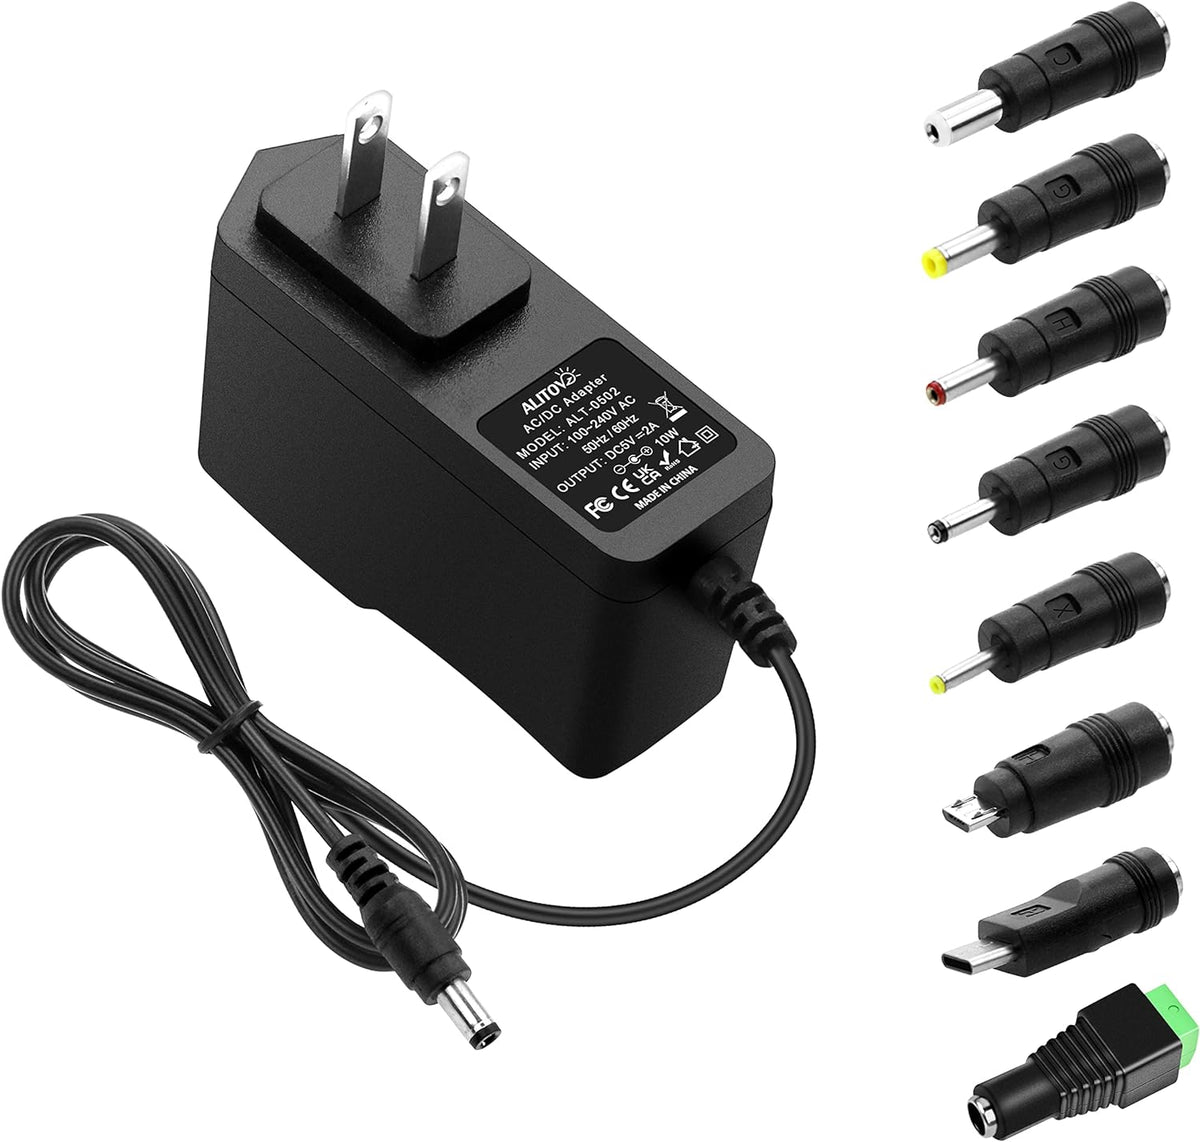 ALITOVE 5V 2A Power Adapter - 5V Power Supply with Tips - ALITOVE-Add Vivid Color to Life